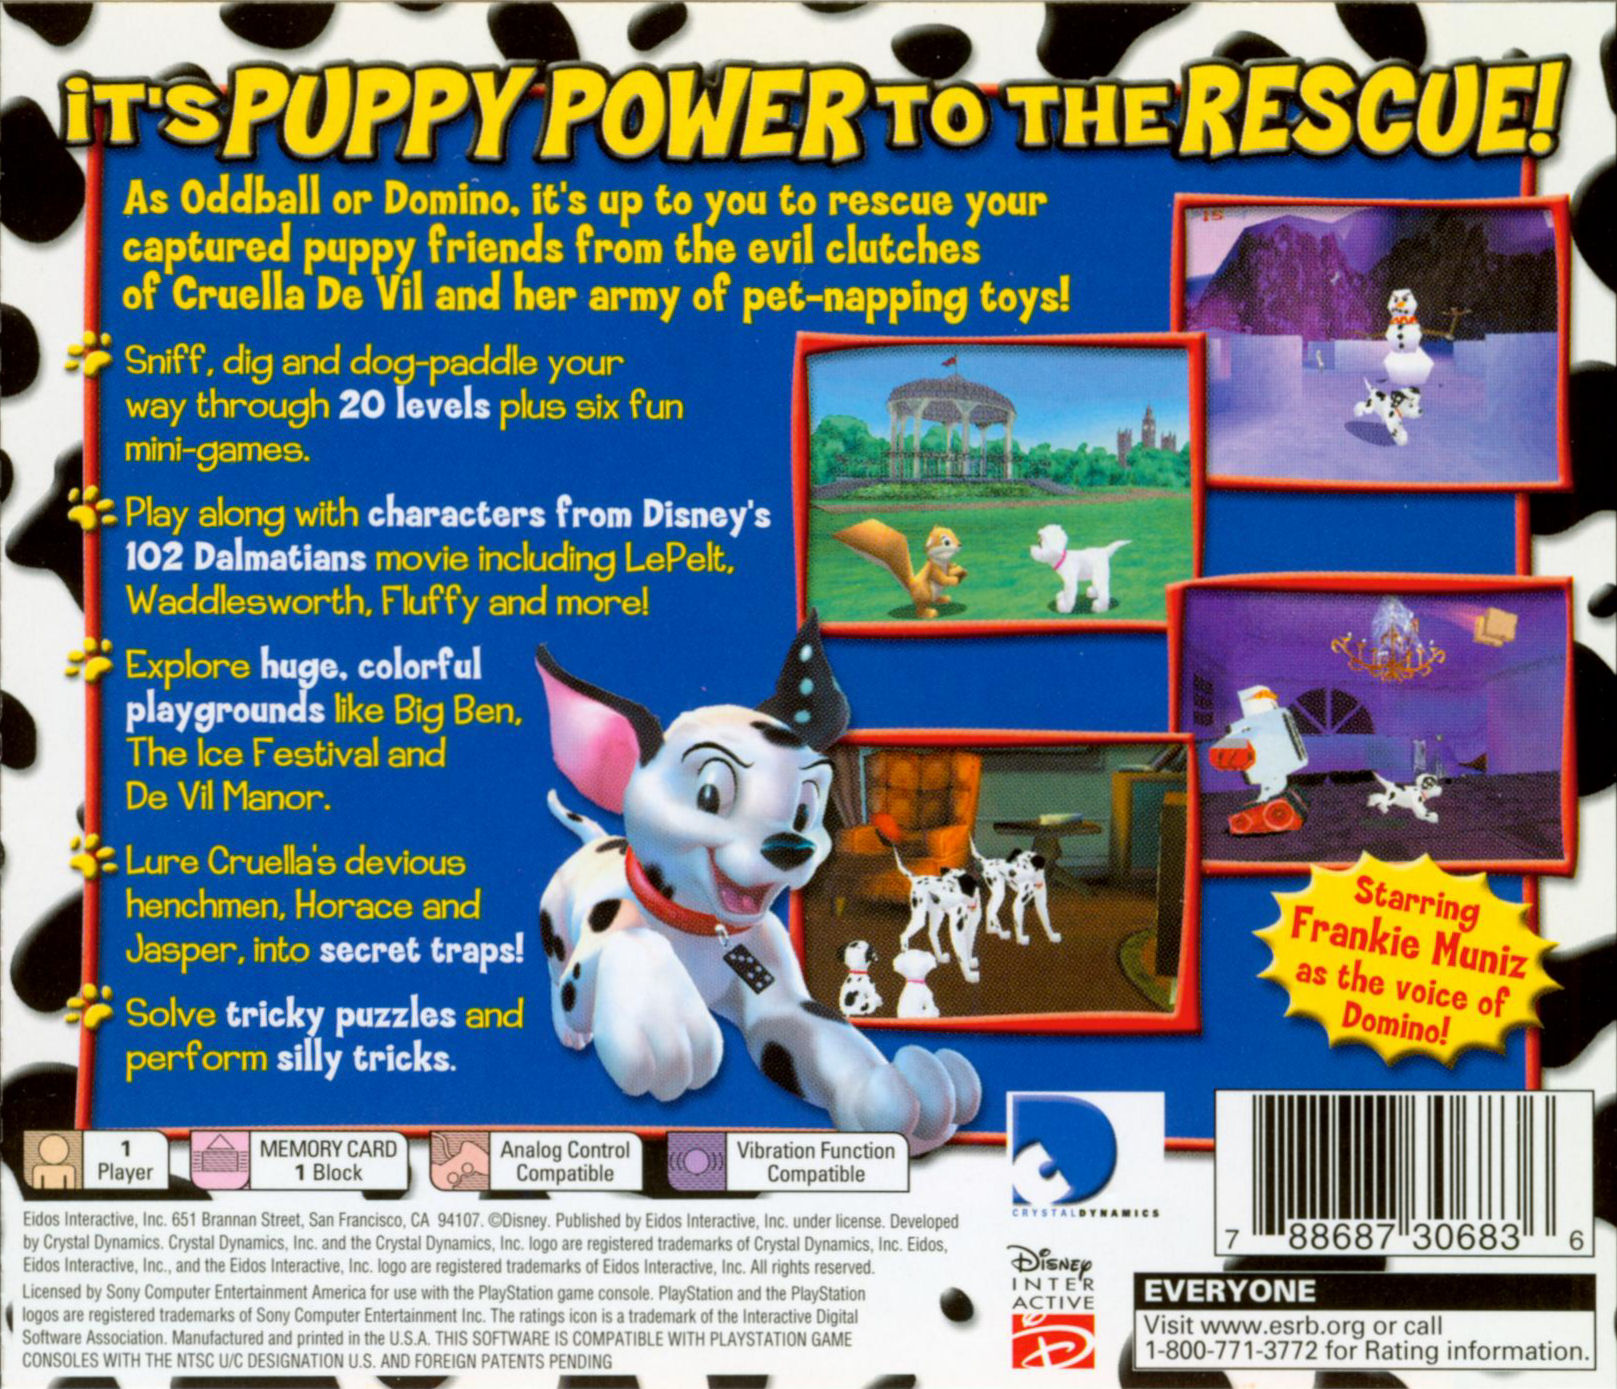 Disney 102 Dalmatians Puppies to the rescue PSX cover